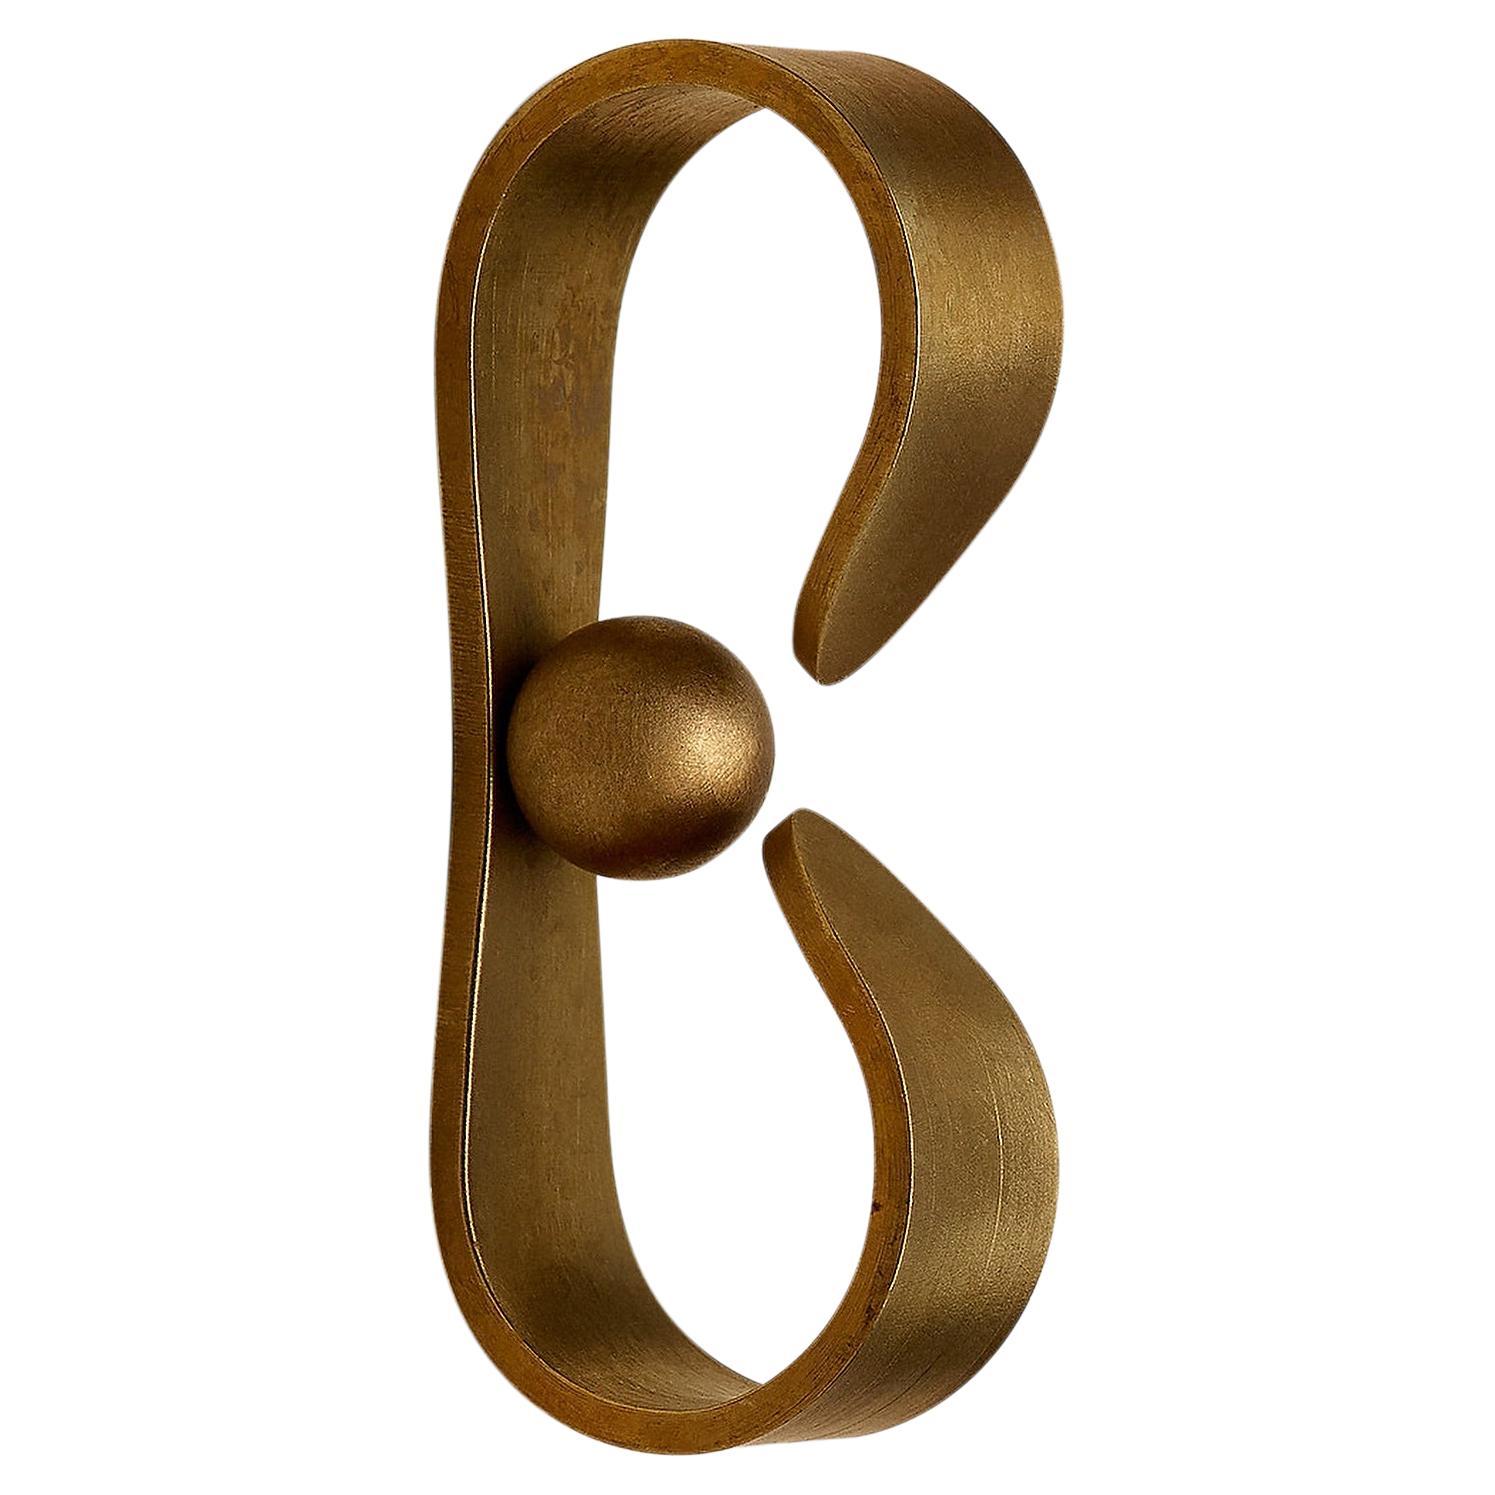 Contemporary Door Handle / Knob 'Prim' by Spaces Within, Amber Brass